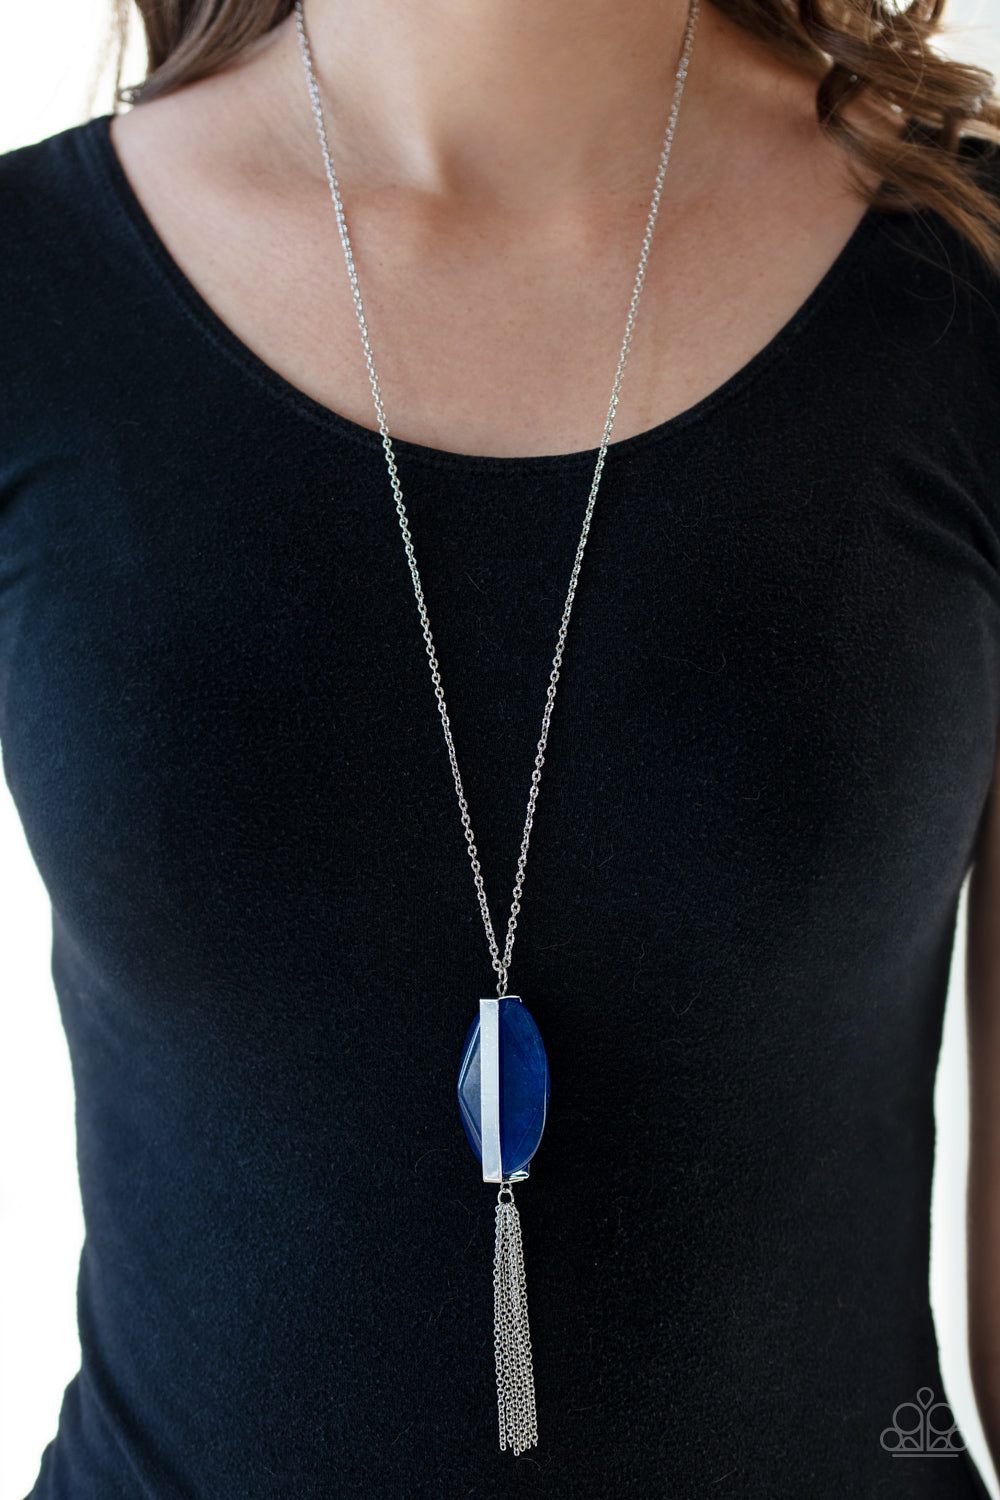 Tranquility Trend Blue Necklace